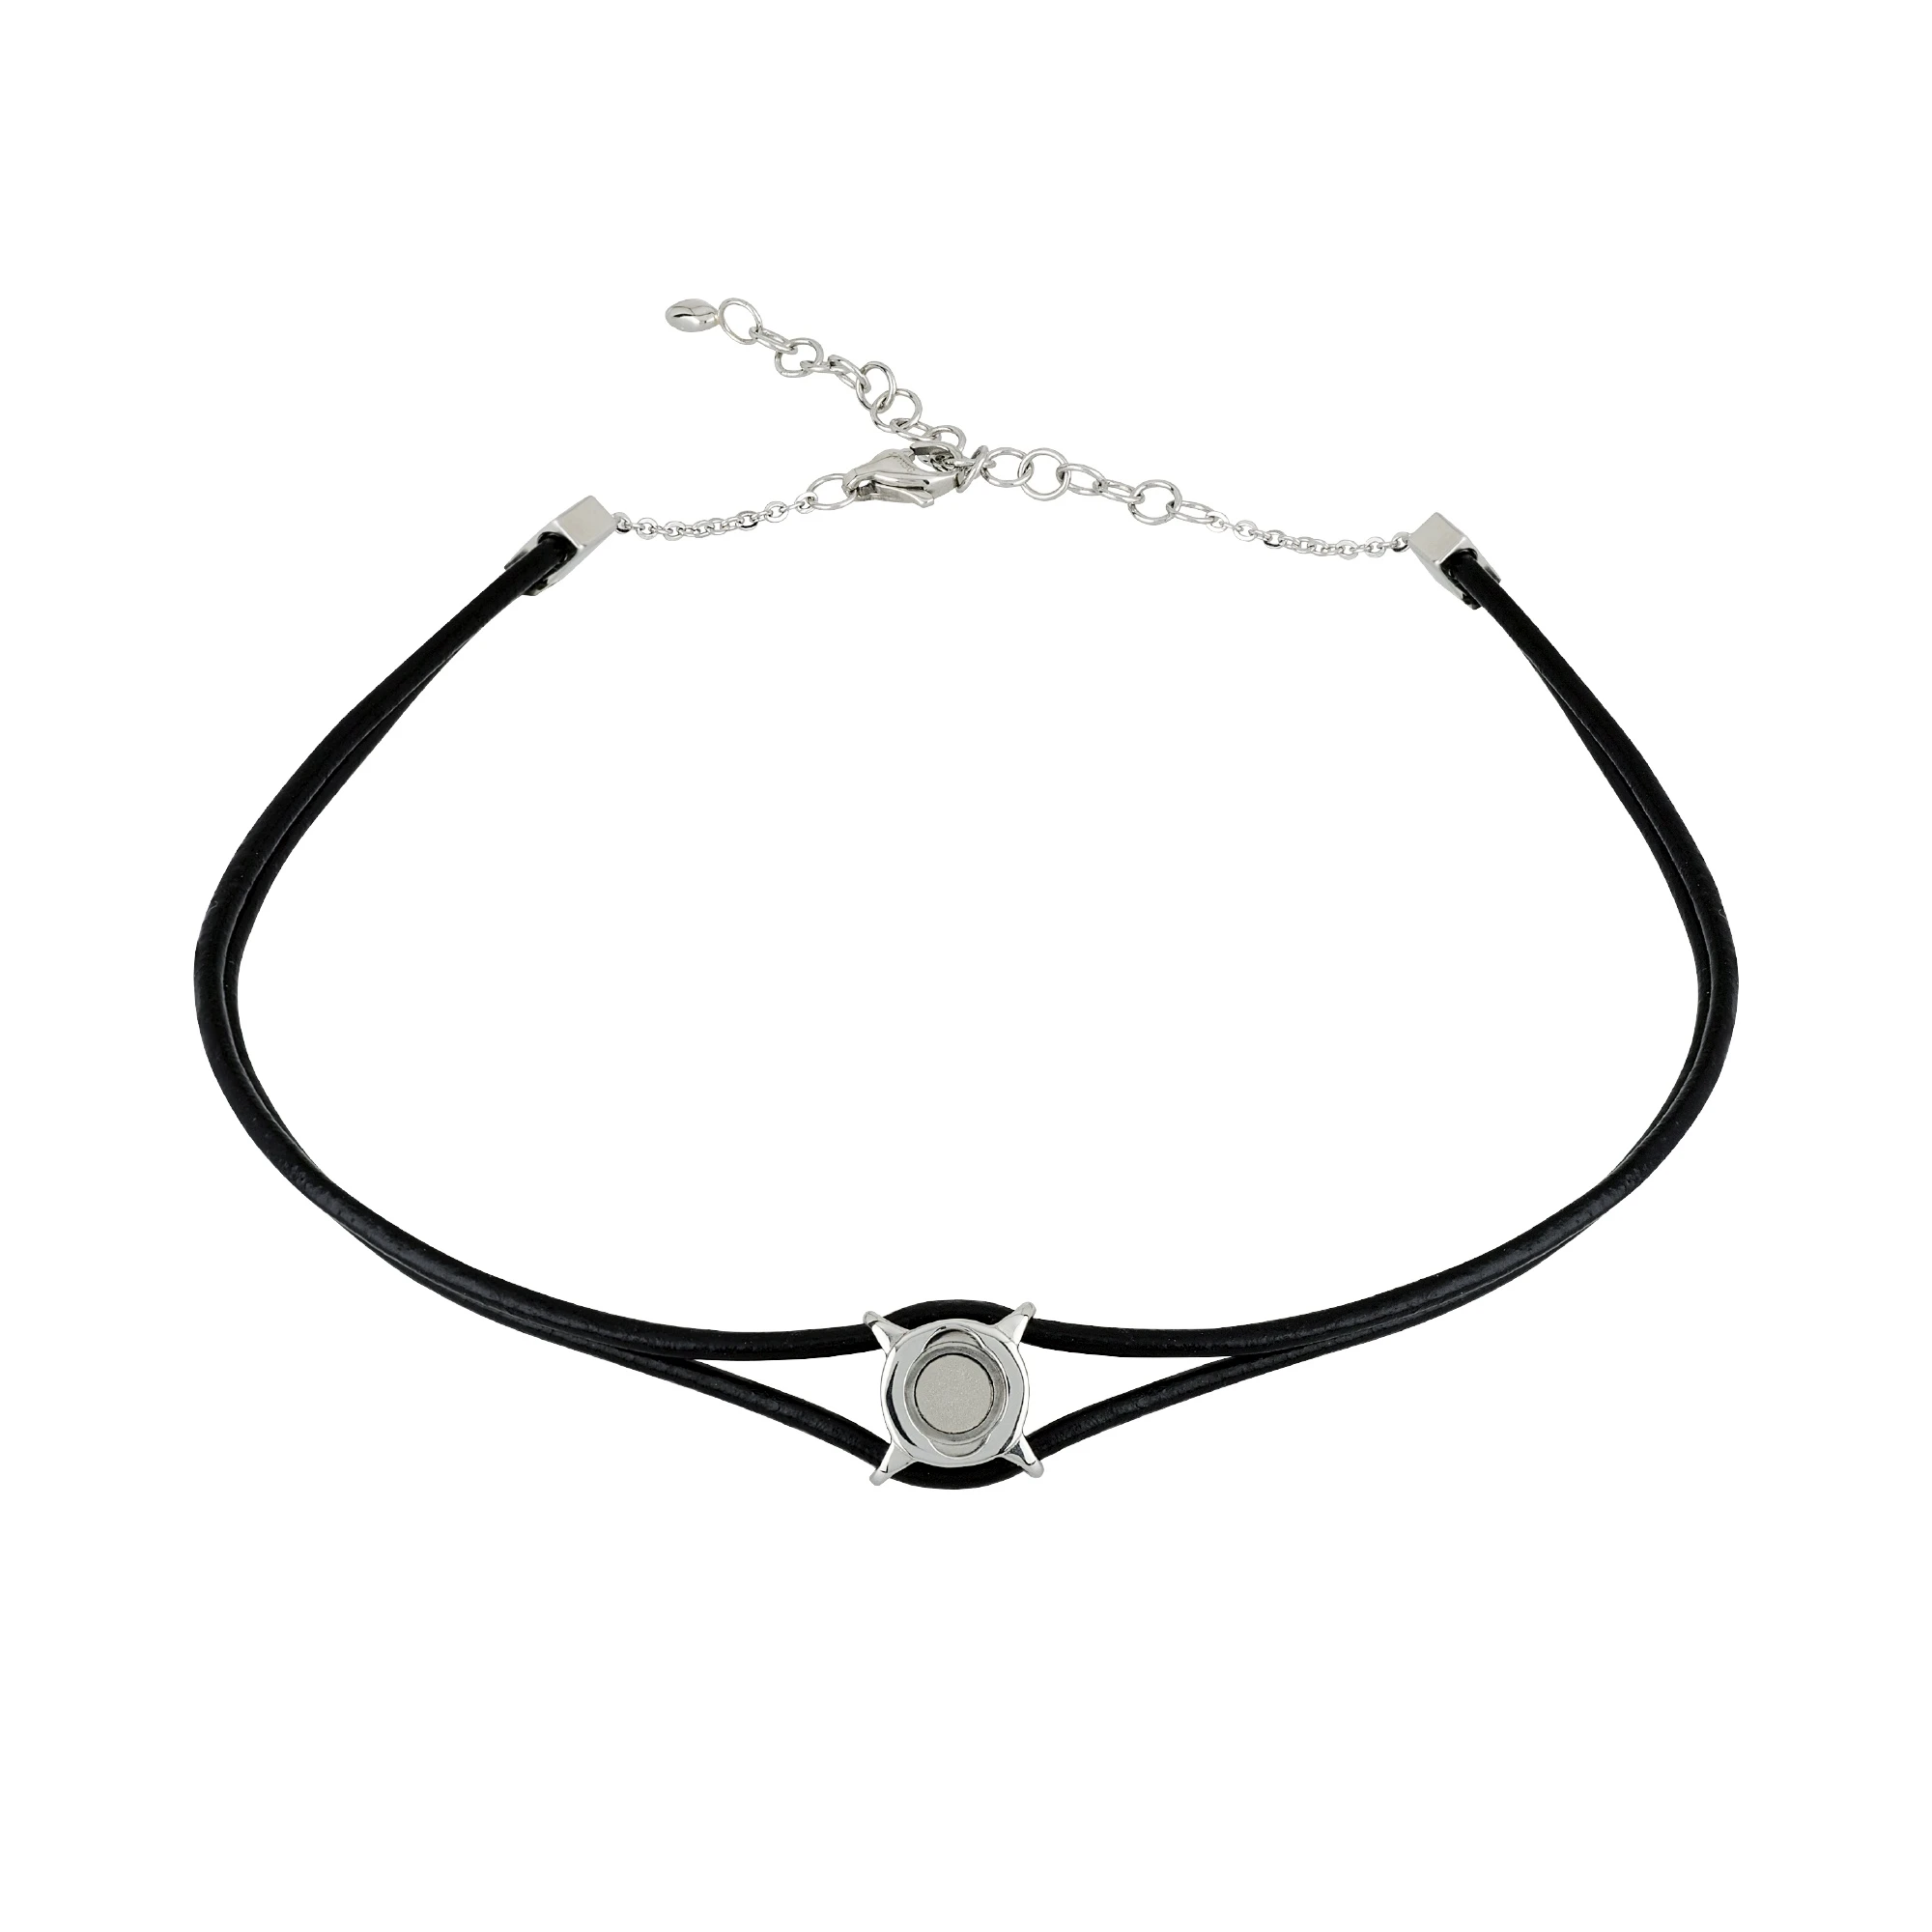 BREIL STONES - BLACK LEATHER CHOKER WITH CENTRAL STAINLESS STEEL SETTING - 1 - TJ2331 | Breil